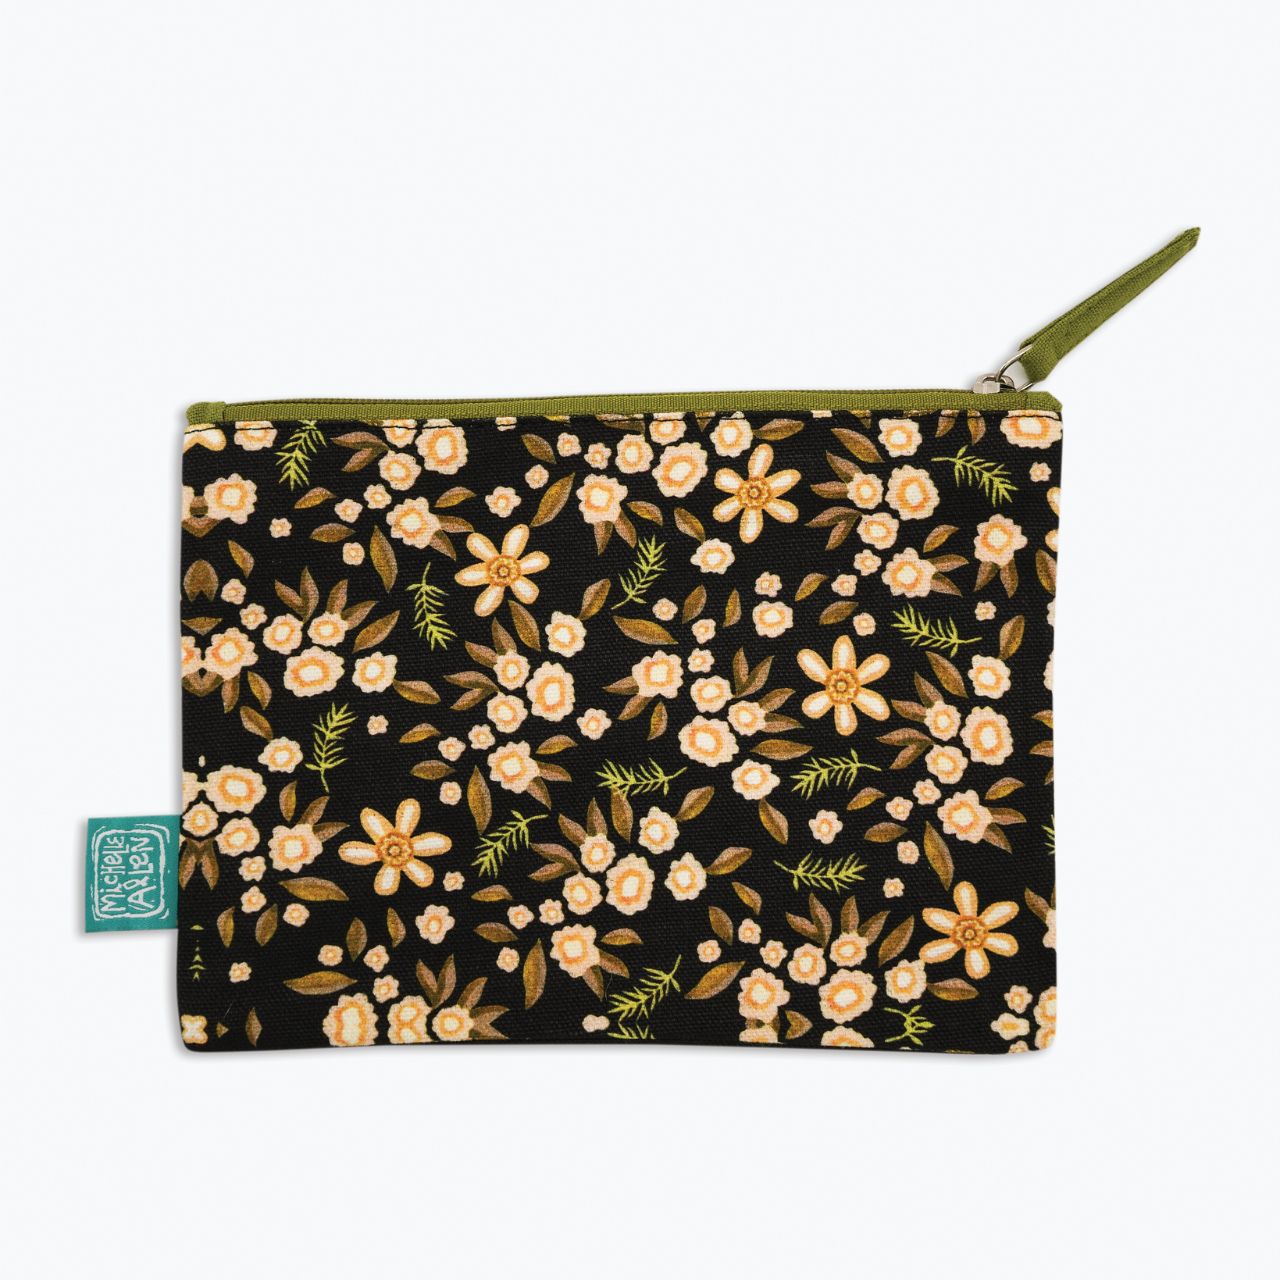 Michelle Allen Black Moth Zipped Pouch Medium  These beautiful zippered 100% Cotton pouches are perfect for pencils/pens, trinkets, charging cords, make up or pretty much anything you can possibly think of. Exclusively designed by Michelle Allen.